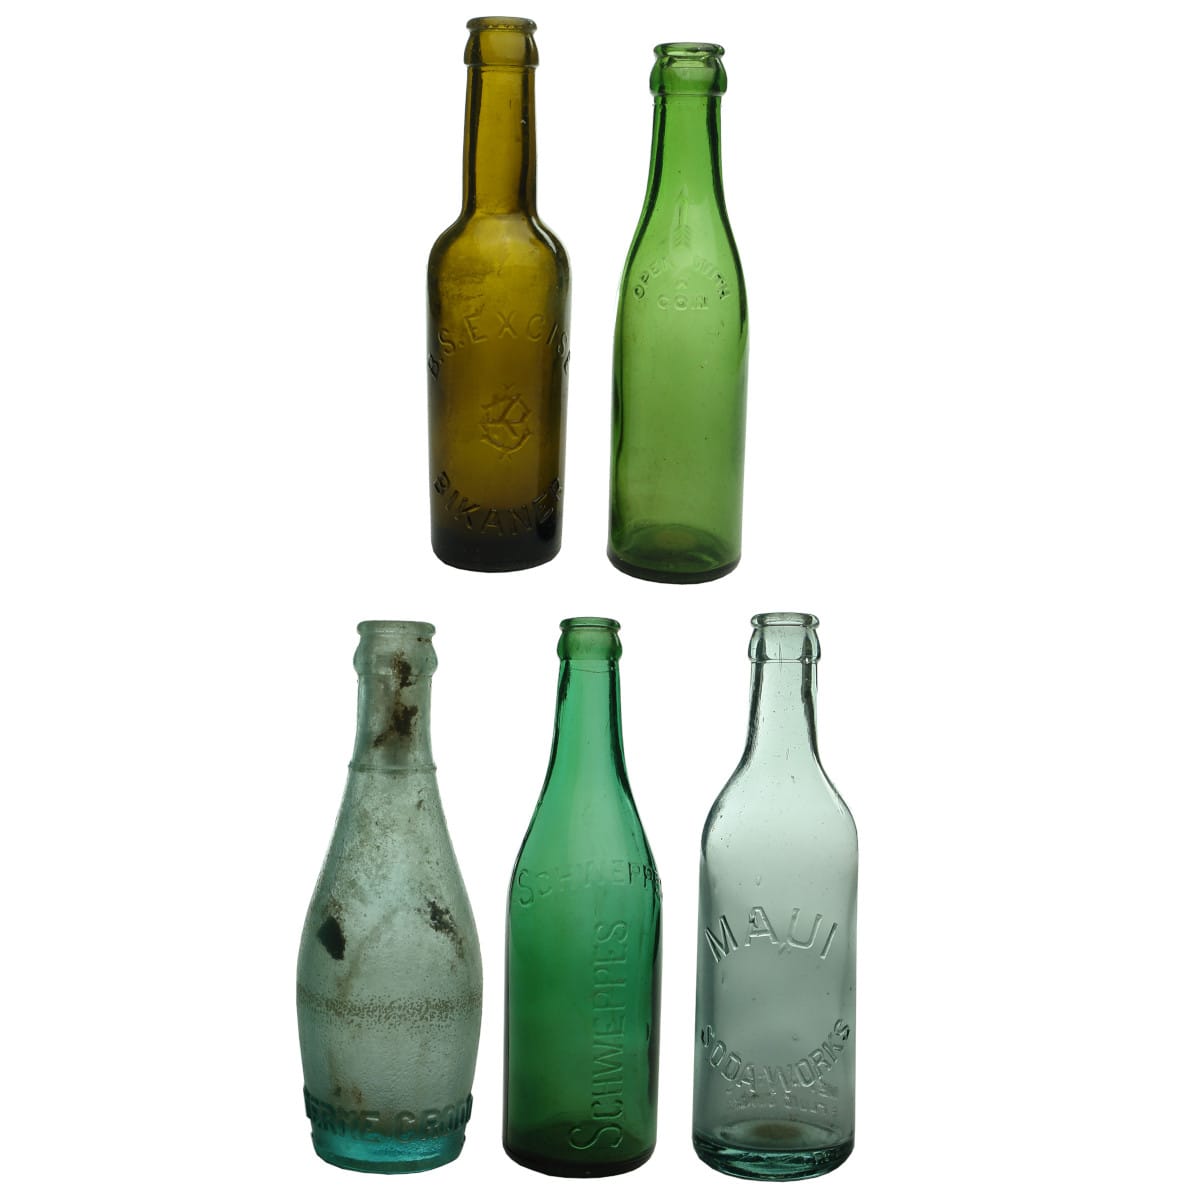 5 Crown Seals: B. S. Excise, Bikaner; Open with a Coin; Terme Crodo; Schweppes green; Maui Soda Works.